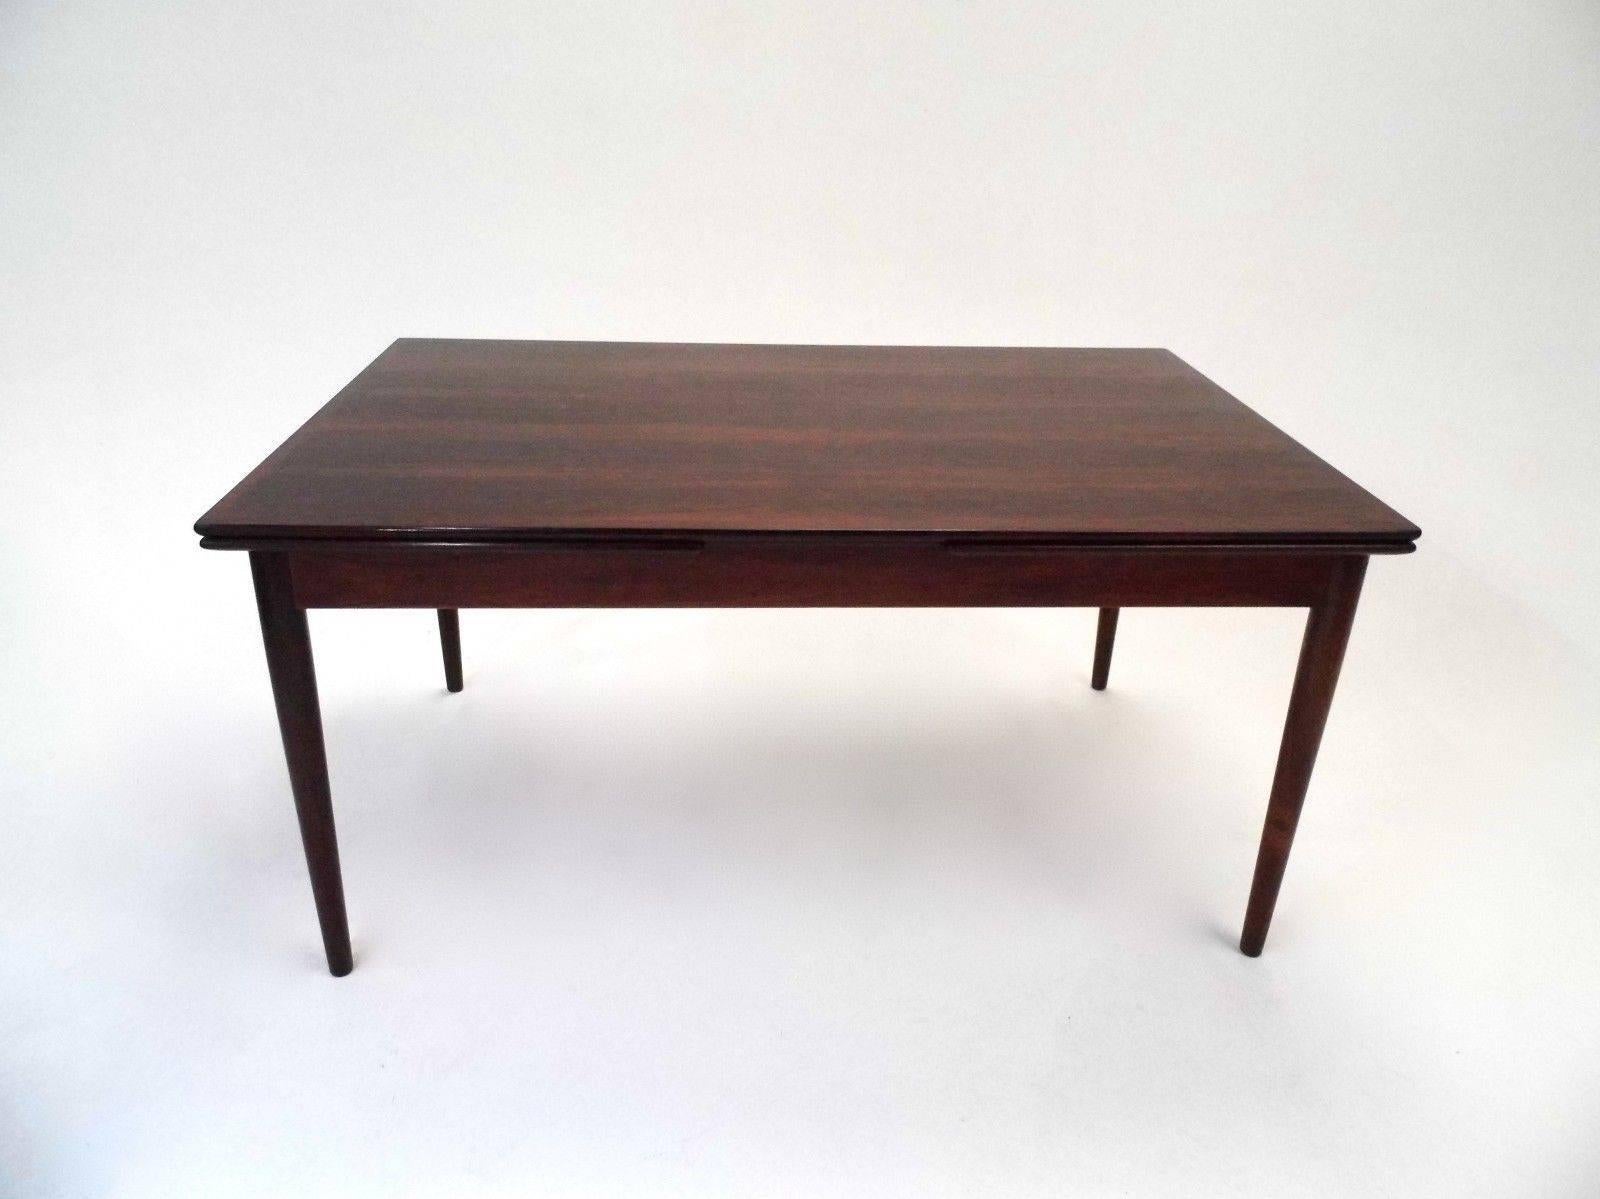 A beautiful Danish rosewood extending dining table, this would make a stylish addition to any dining area. The table has two extension panels which fit discreetly below the top panel and can be pulled out when needed. A striking piece of classically